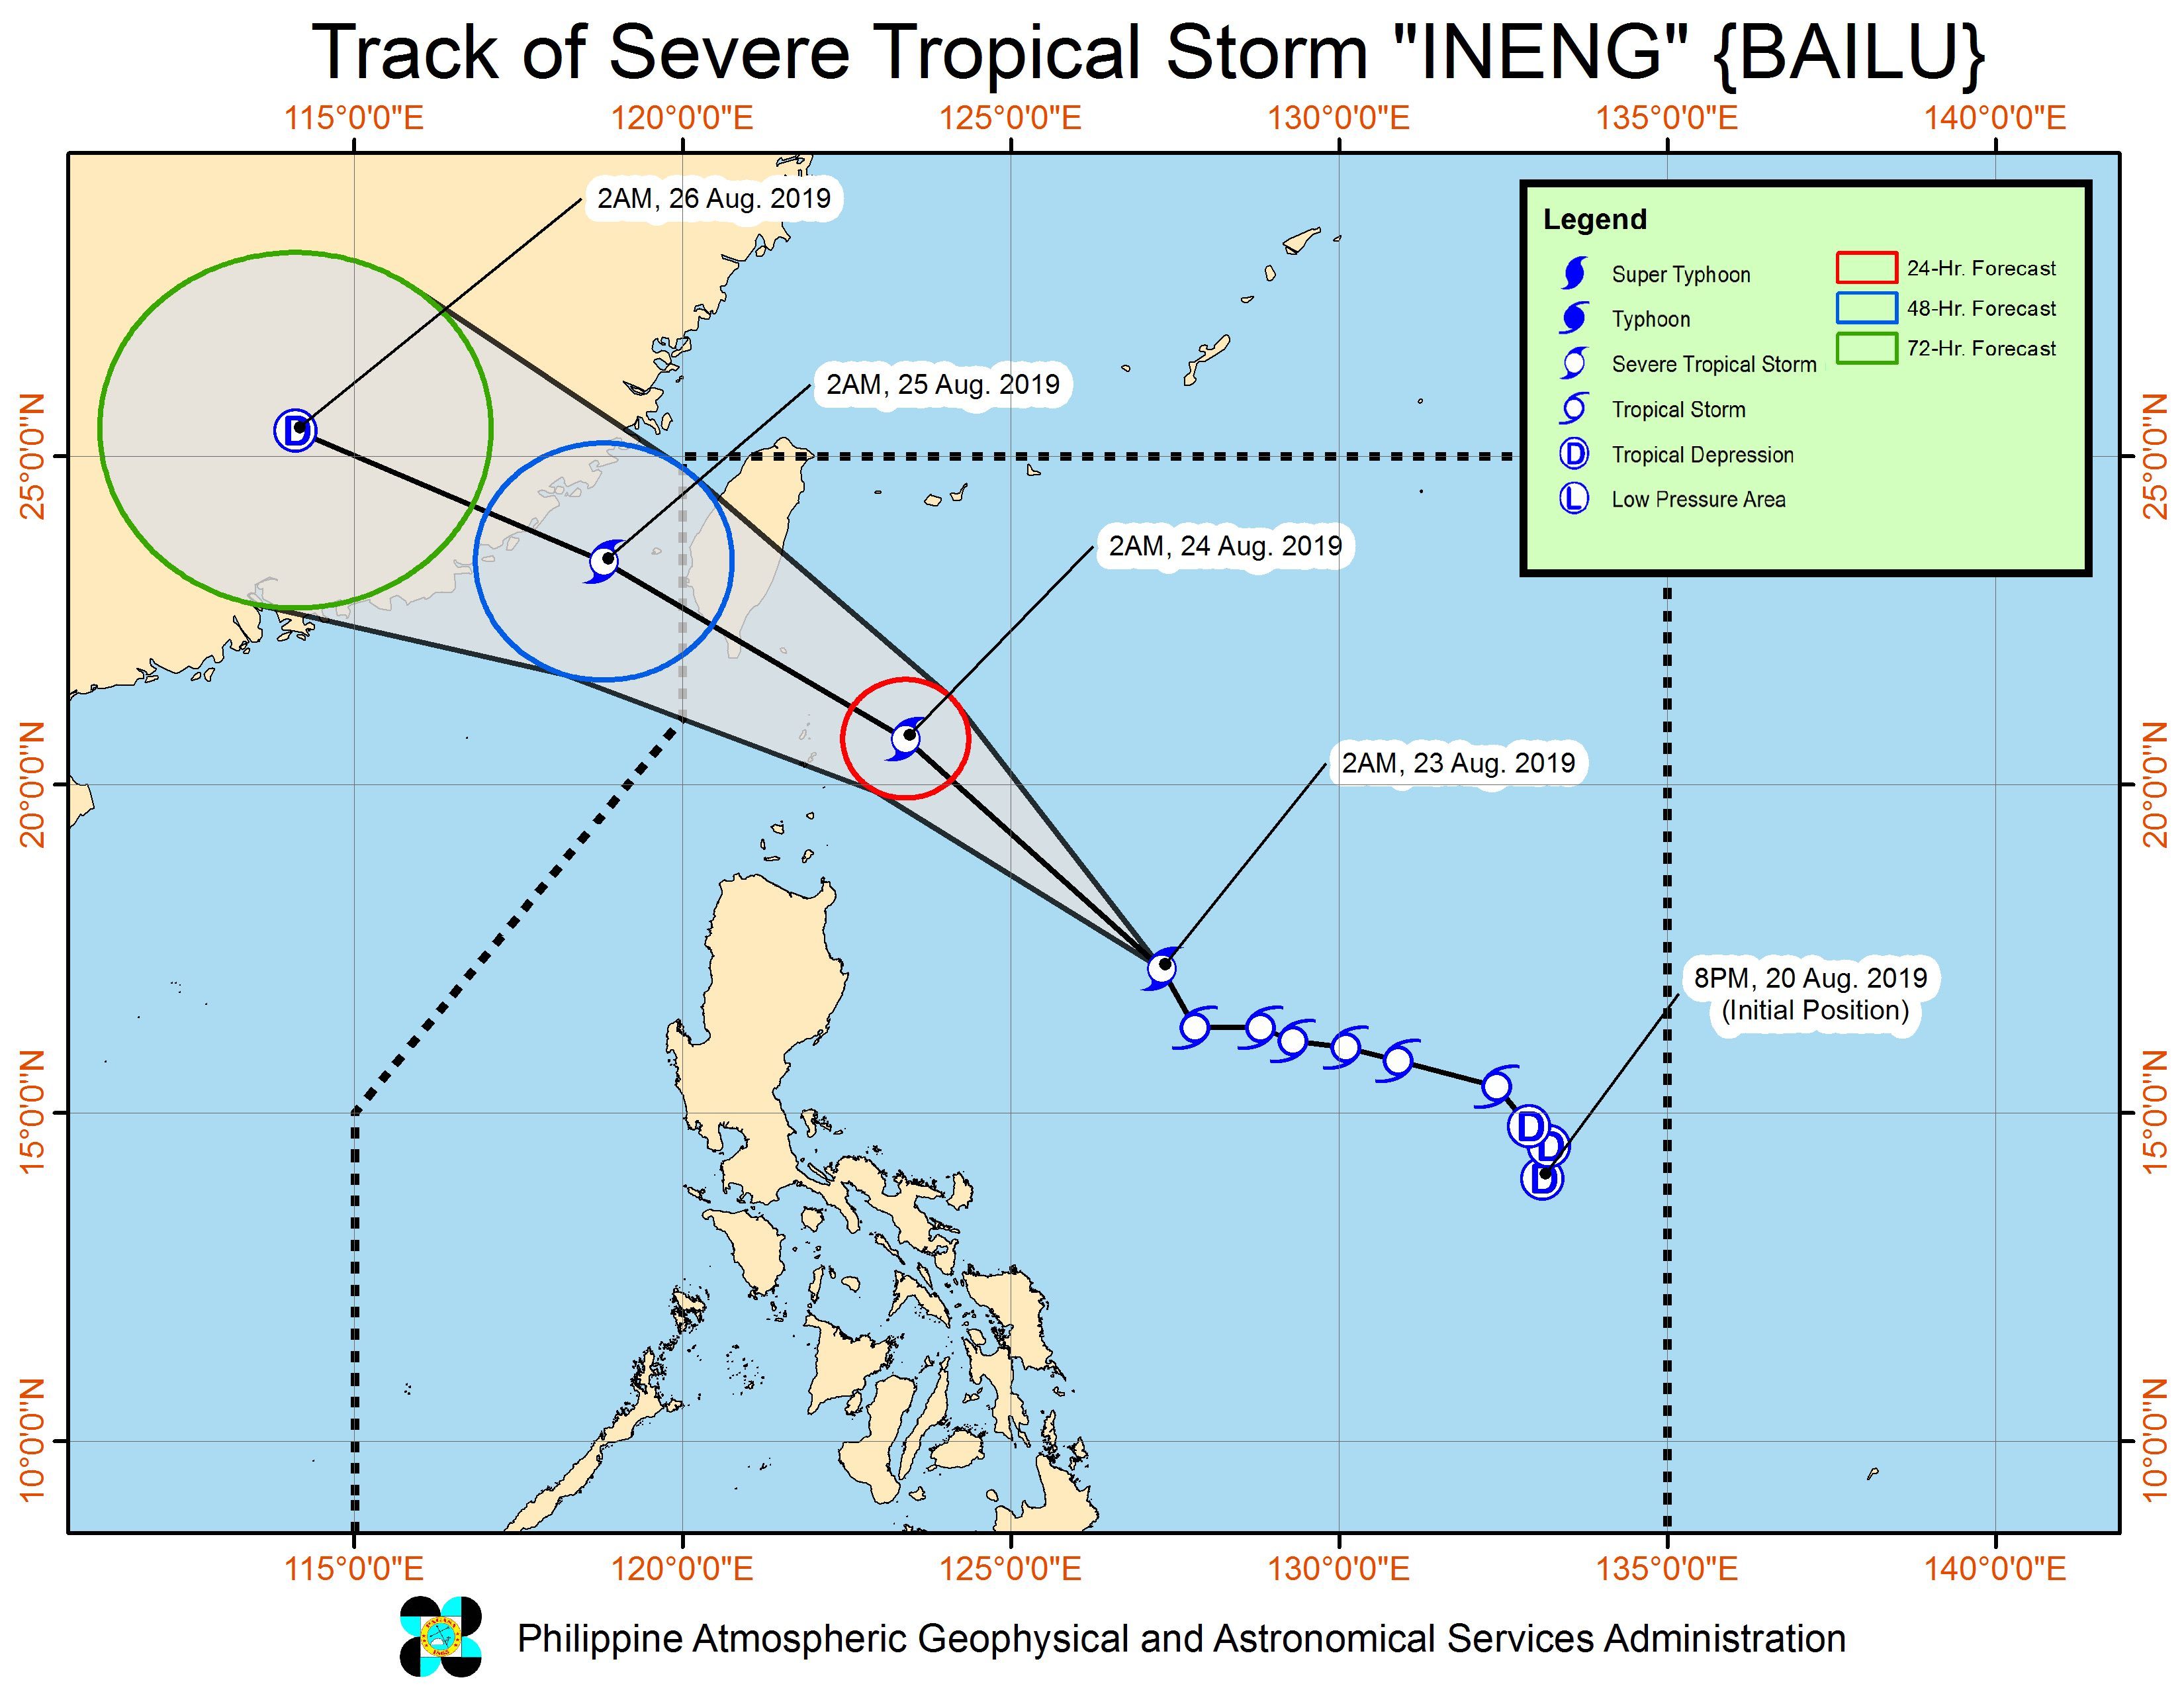 Forecast track of Severe Tropical Storm Ineng (Bailu) as of August 23, 2019, 5 am. Image from PAGASA 